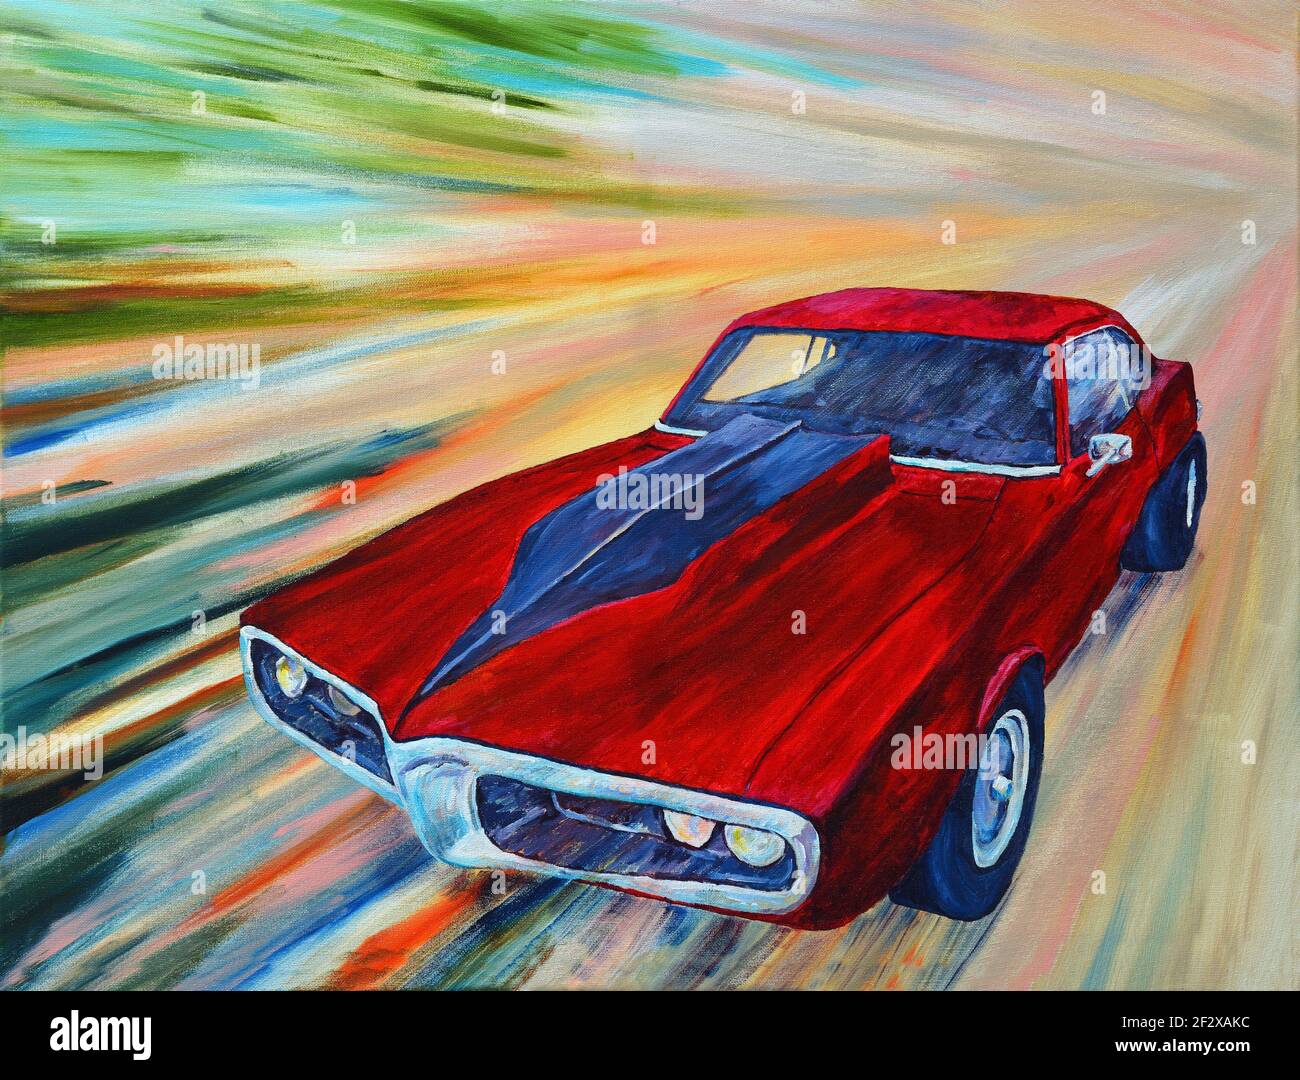 Classic Red Pontiac Firebird American muscle car with abstract speed affect background Stock Photo